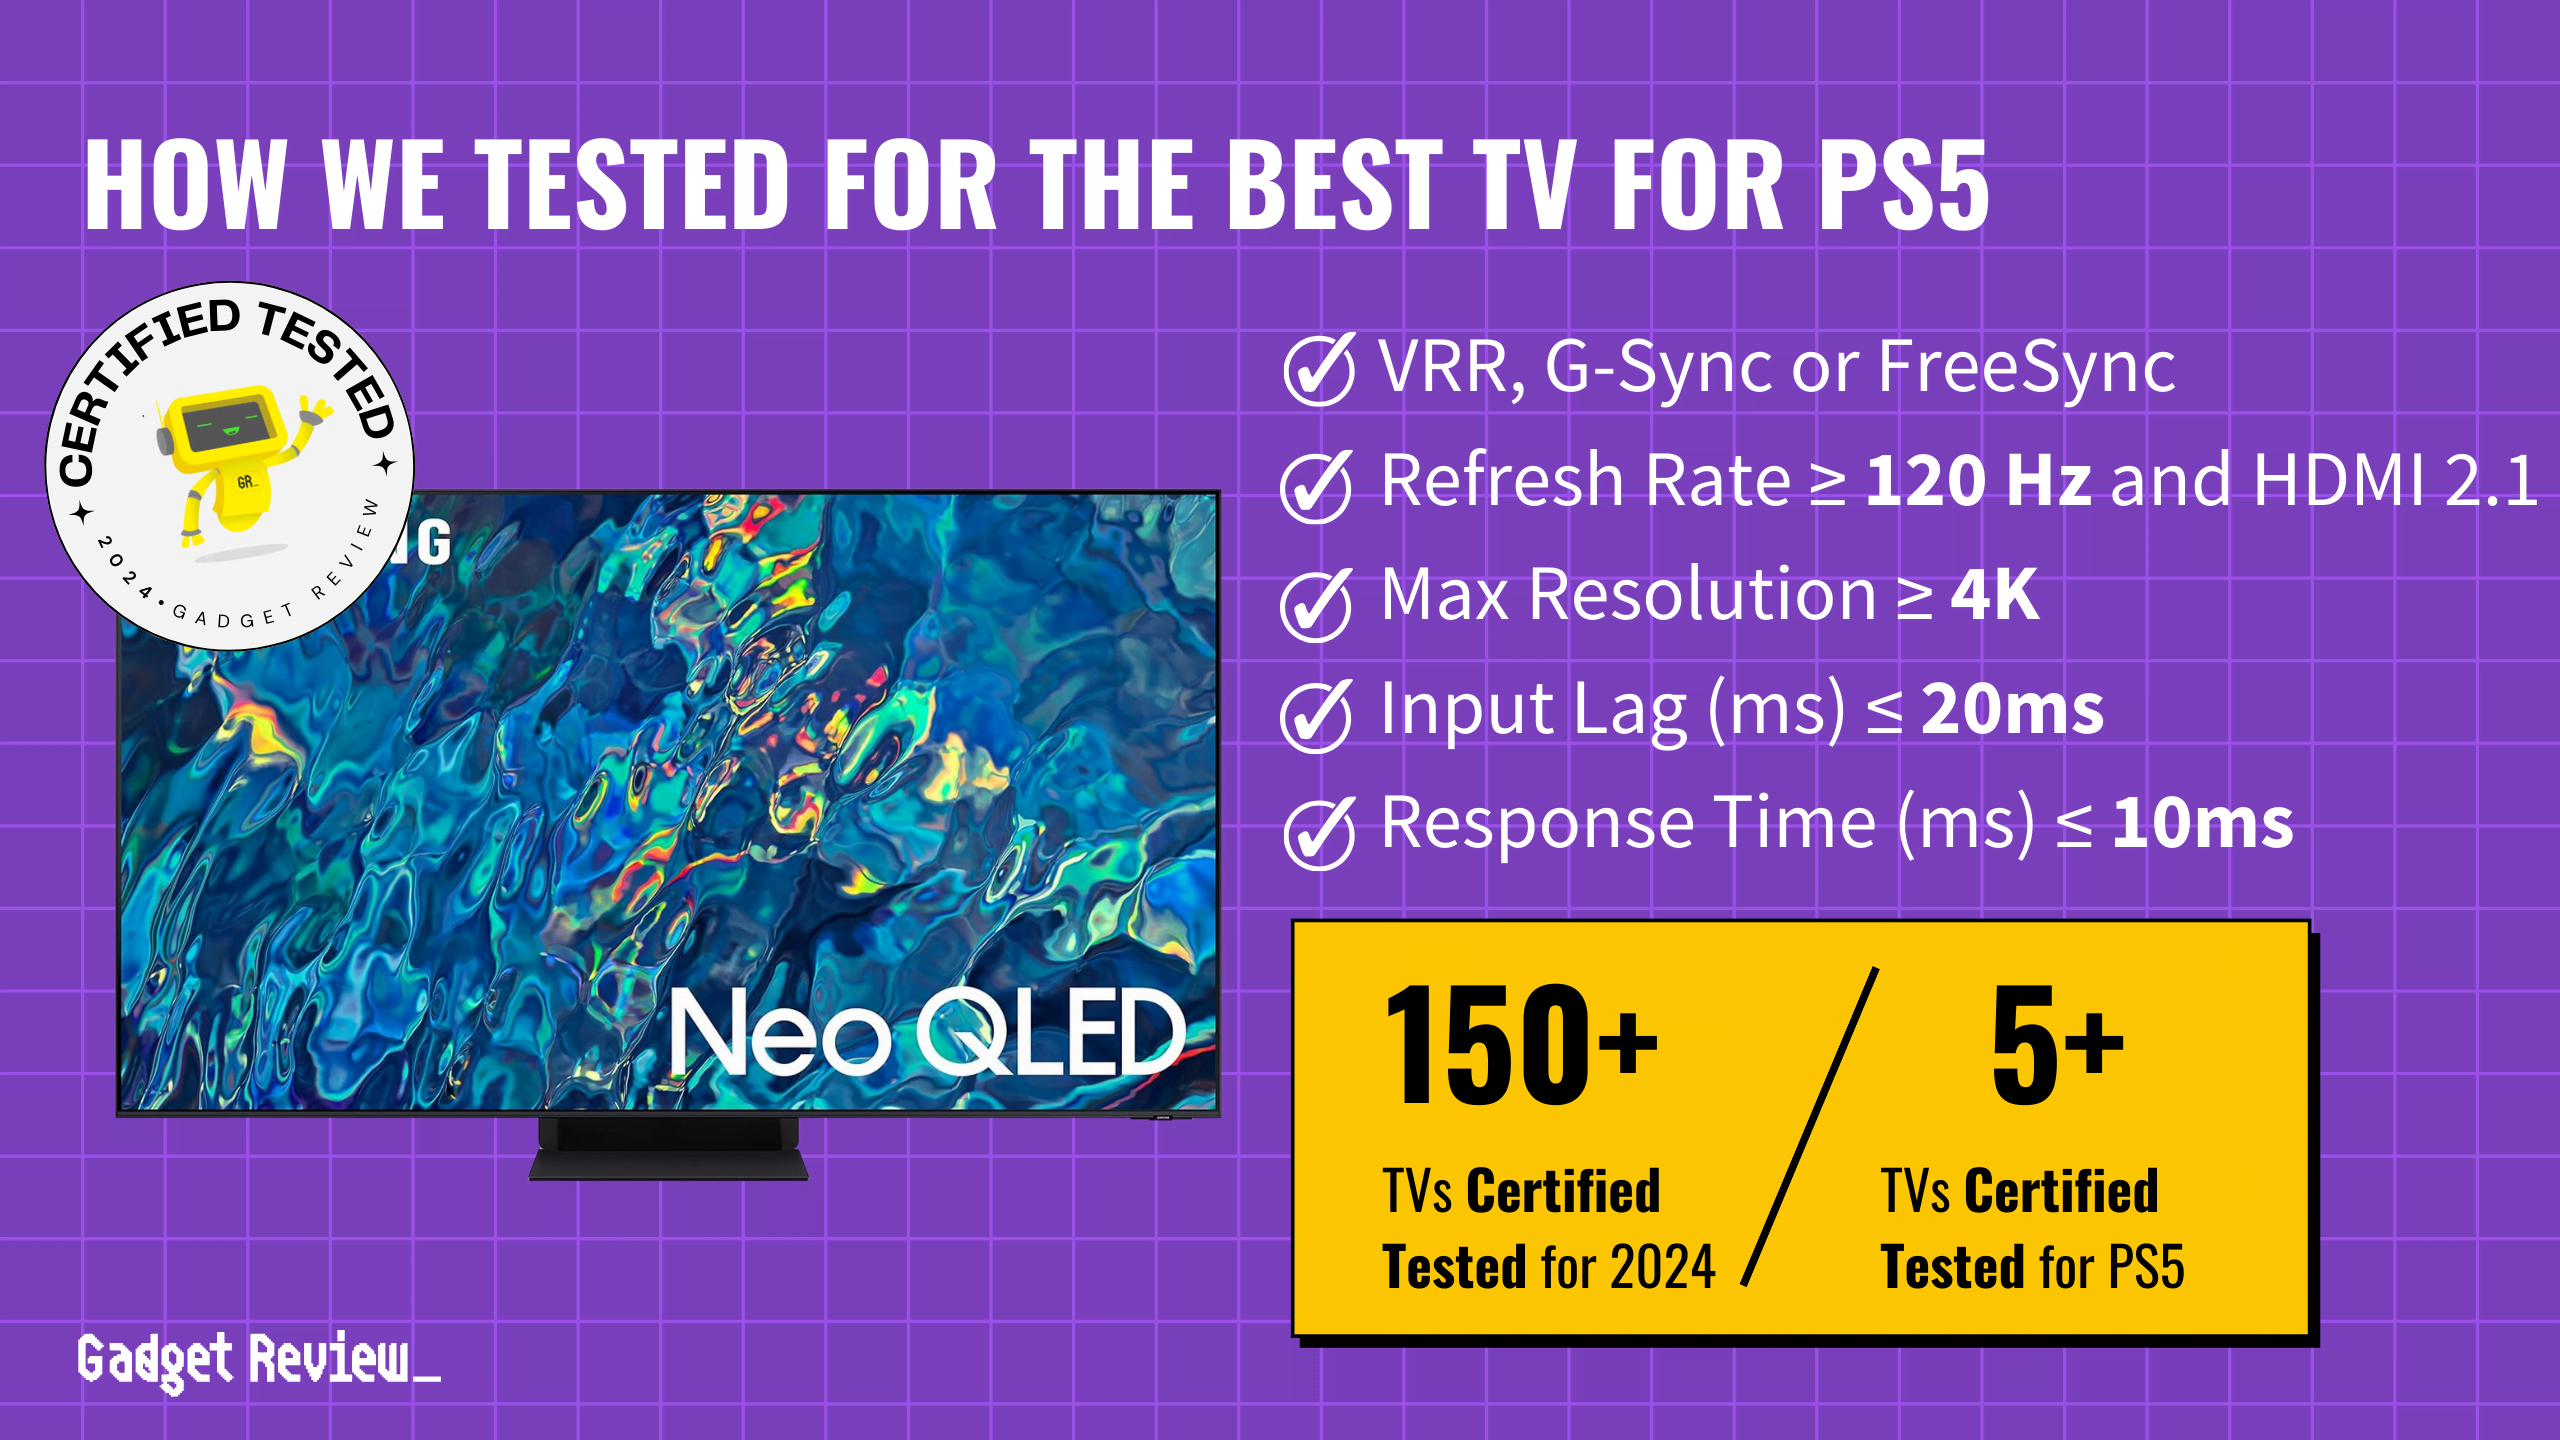 best tv for ps5 guide that shows the top best tv model